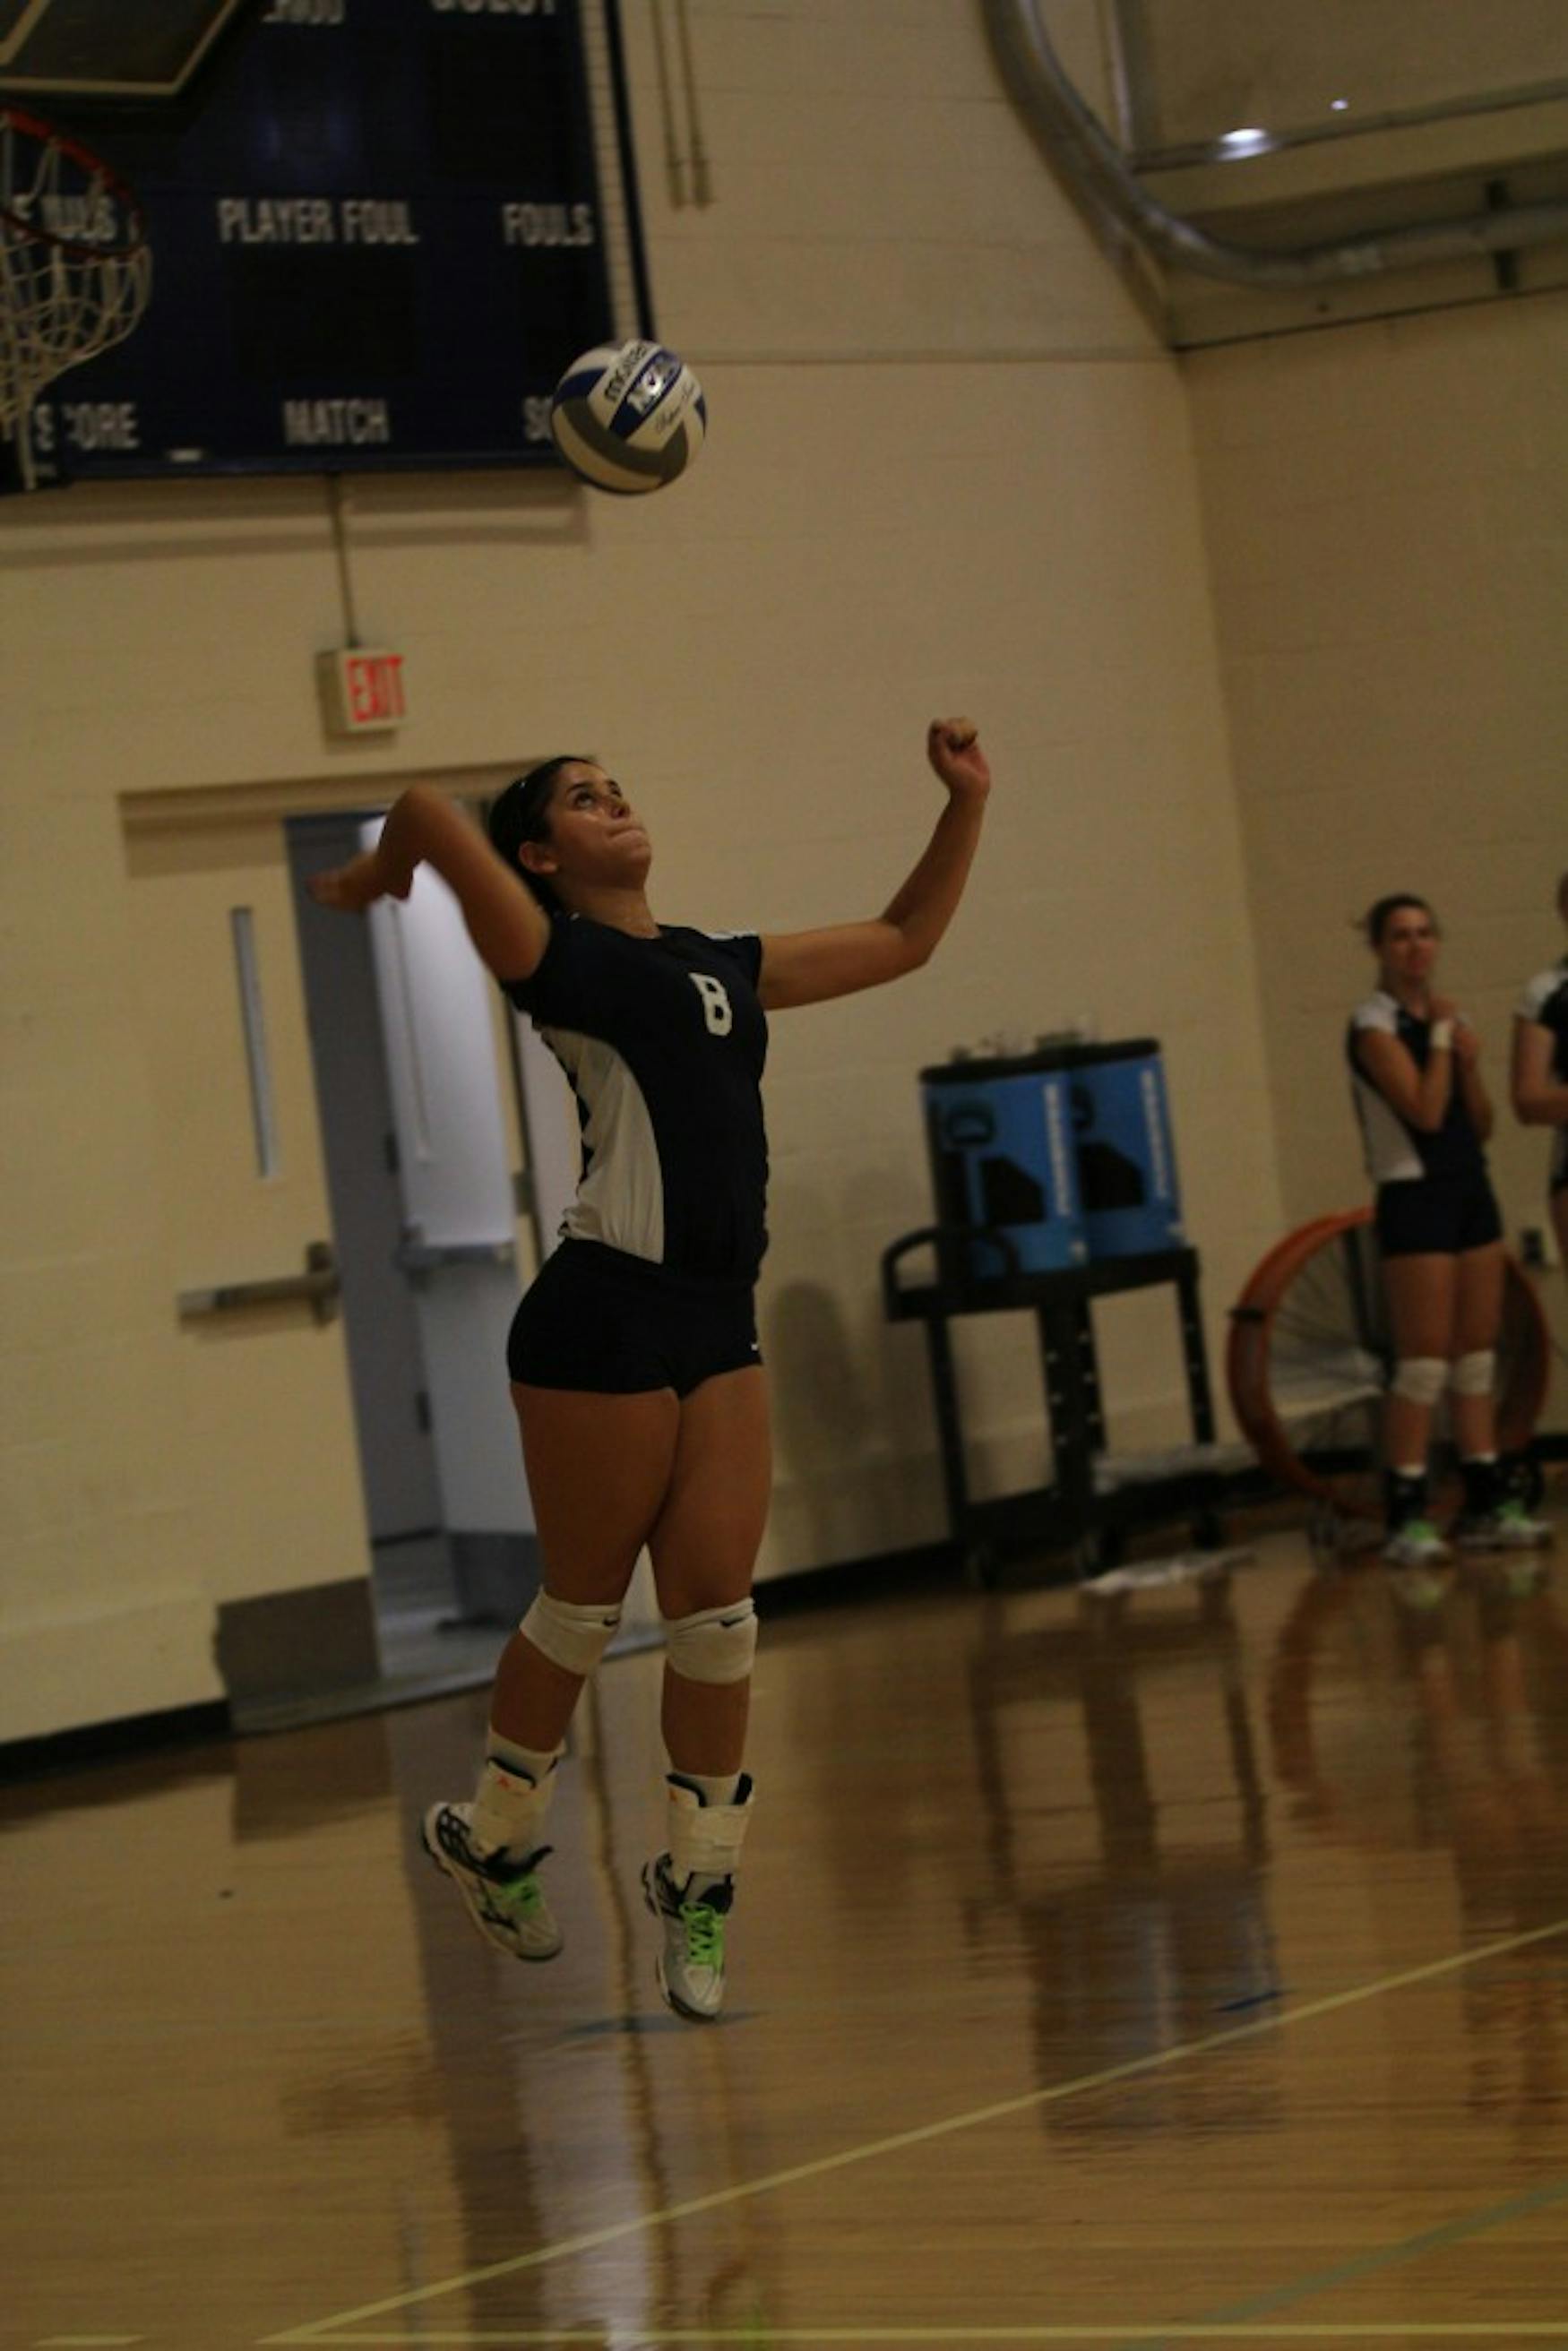 DIGGING IN: Setter Leah Pearlman ’19 serves against Southern Maine University on Sep. 5 during the Brandeis Invitational.